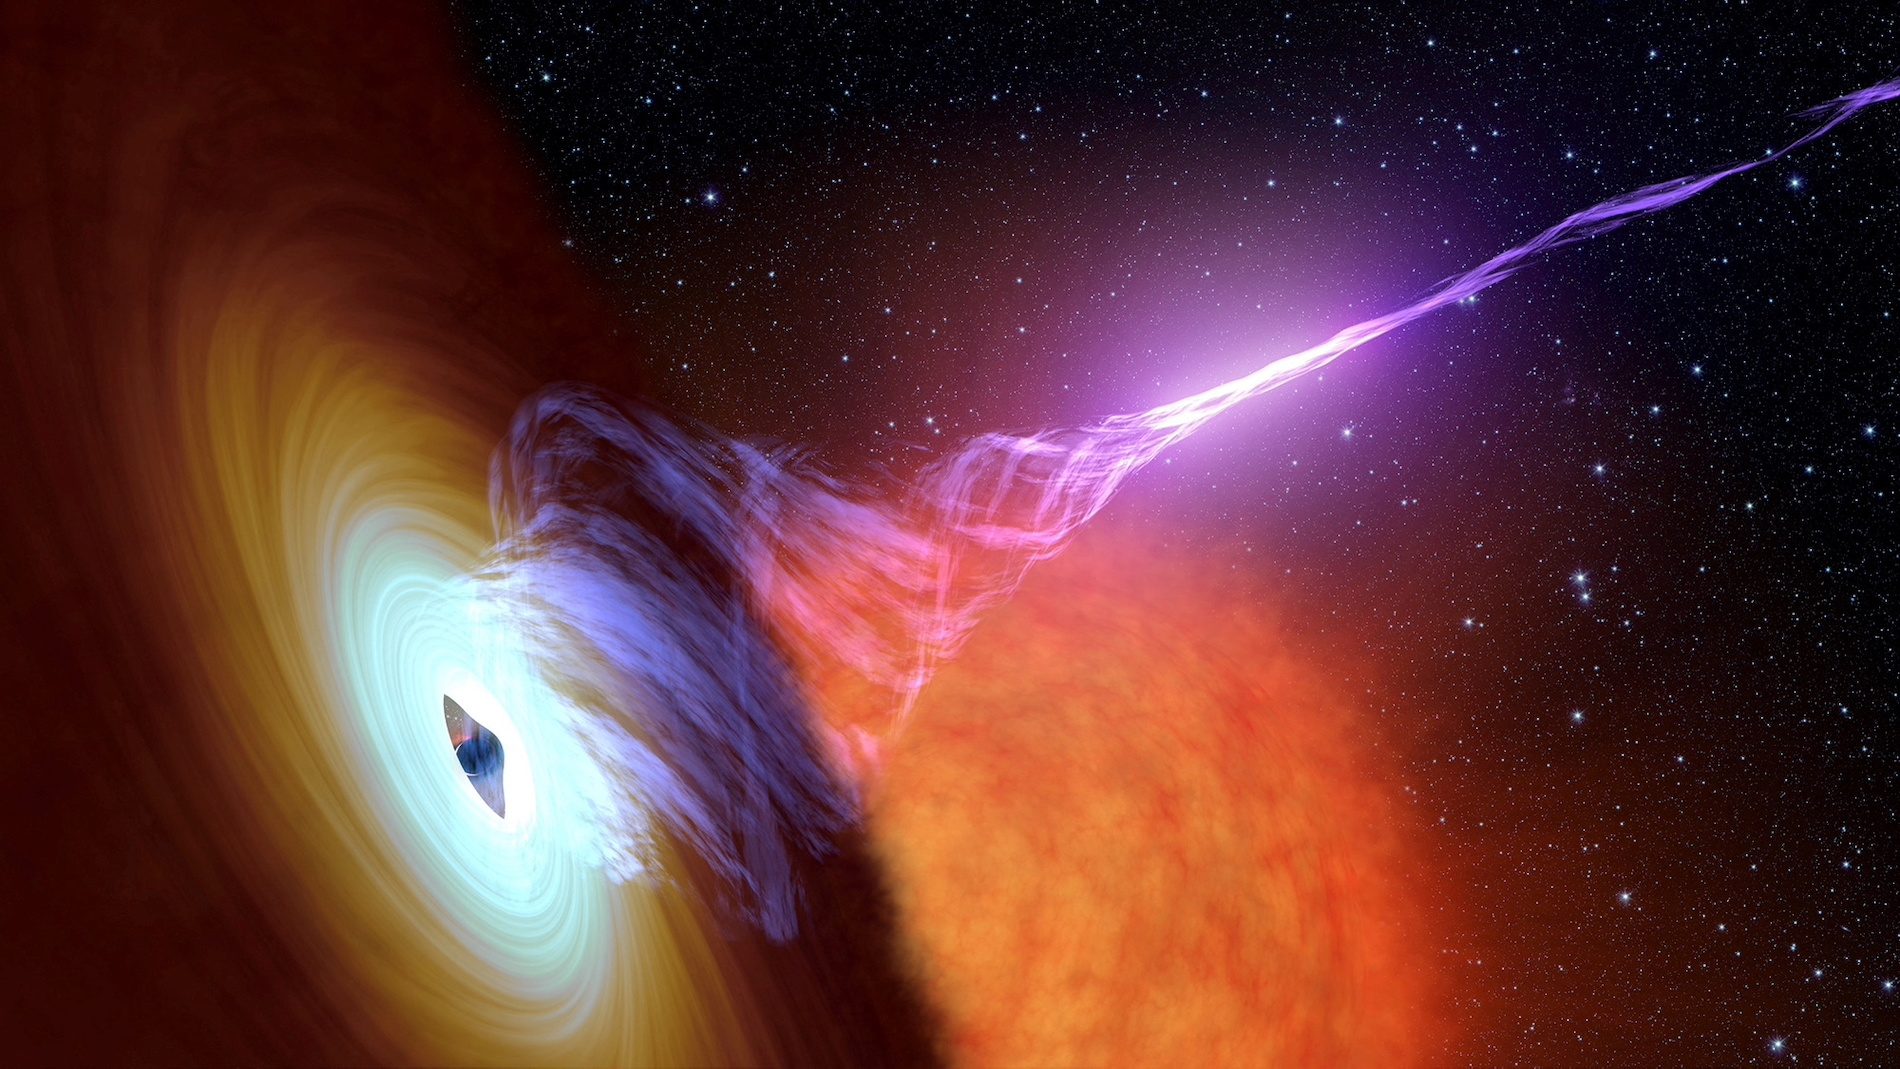 Scientists unveil image of huge black hole at Milky Way’s center